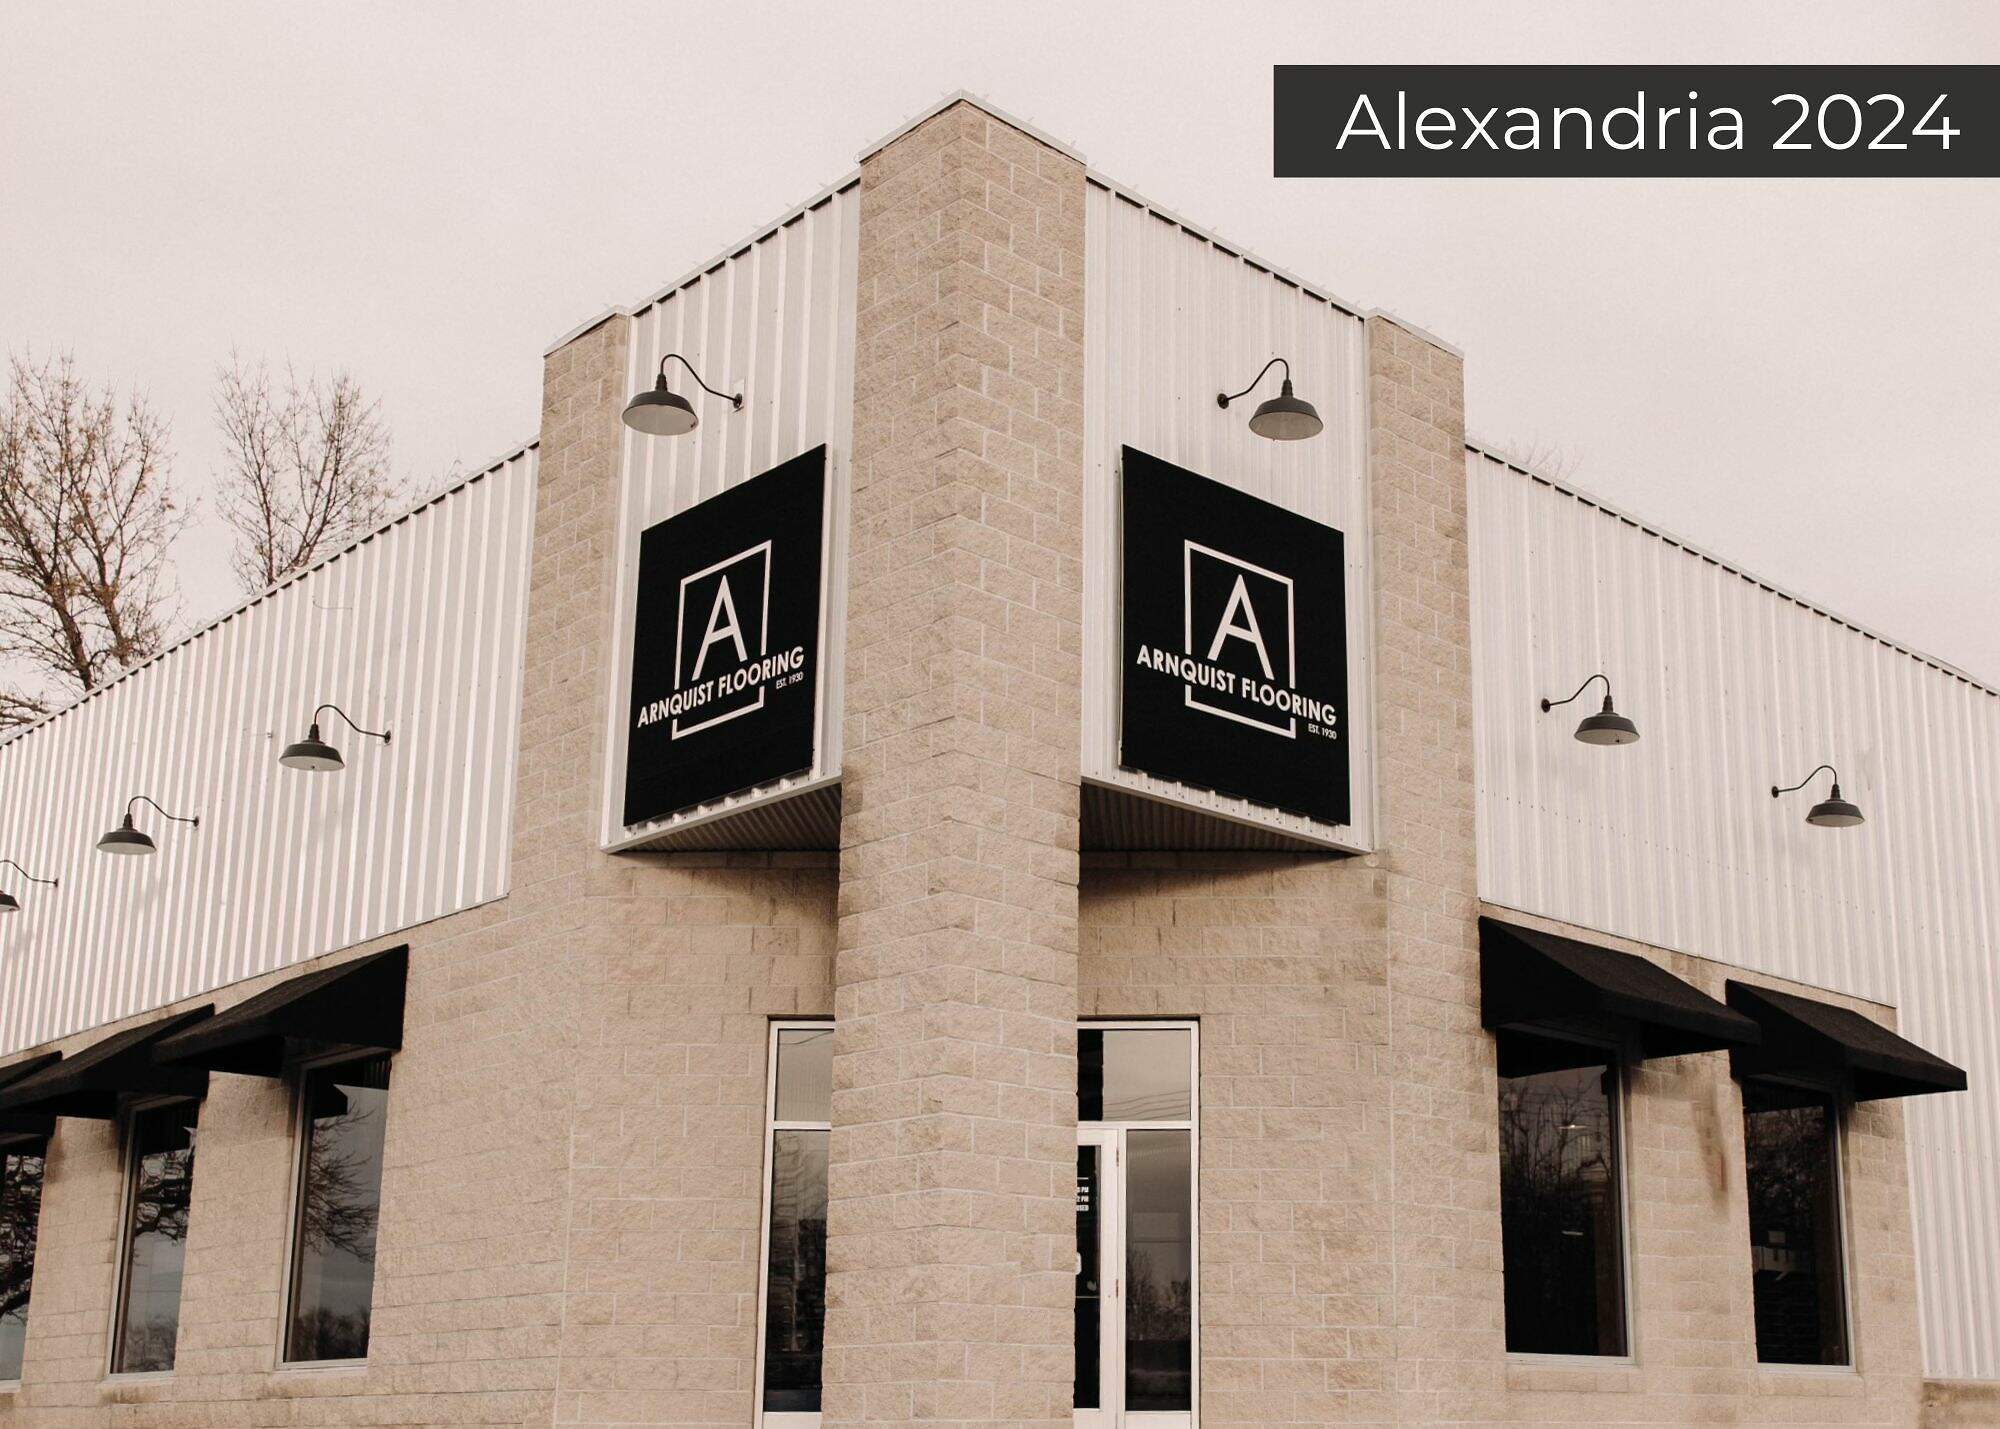 Modern commercial building with a corrugated metal facade, featuring two prominent signs for 'Alexandria Roofing', captured on a cloudy day—anticipating business growth in 2024.